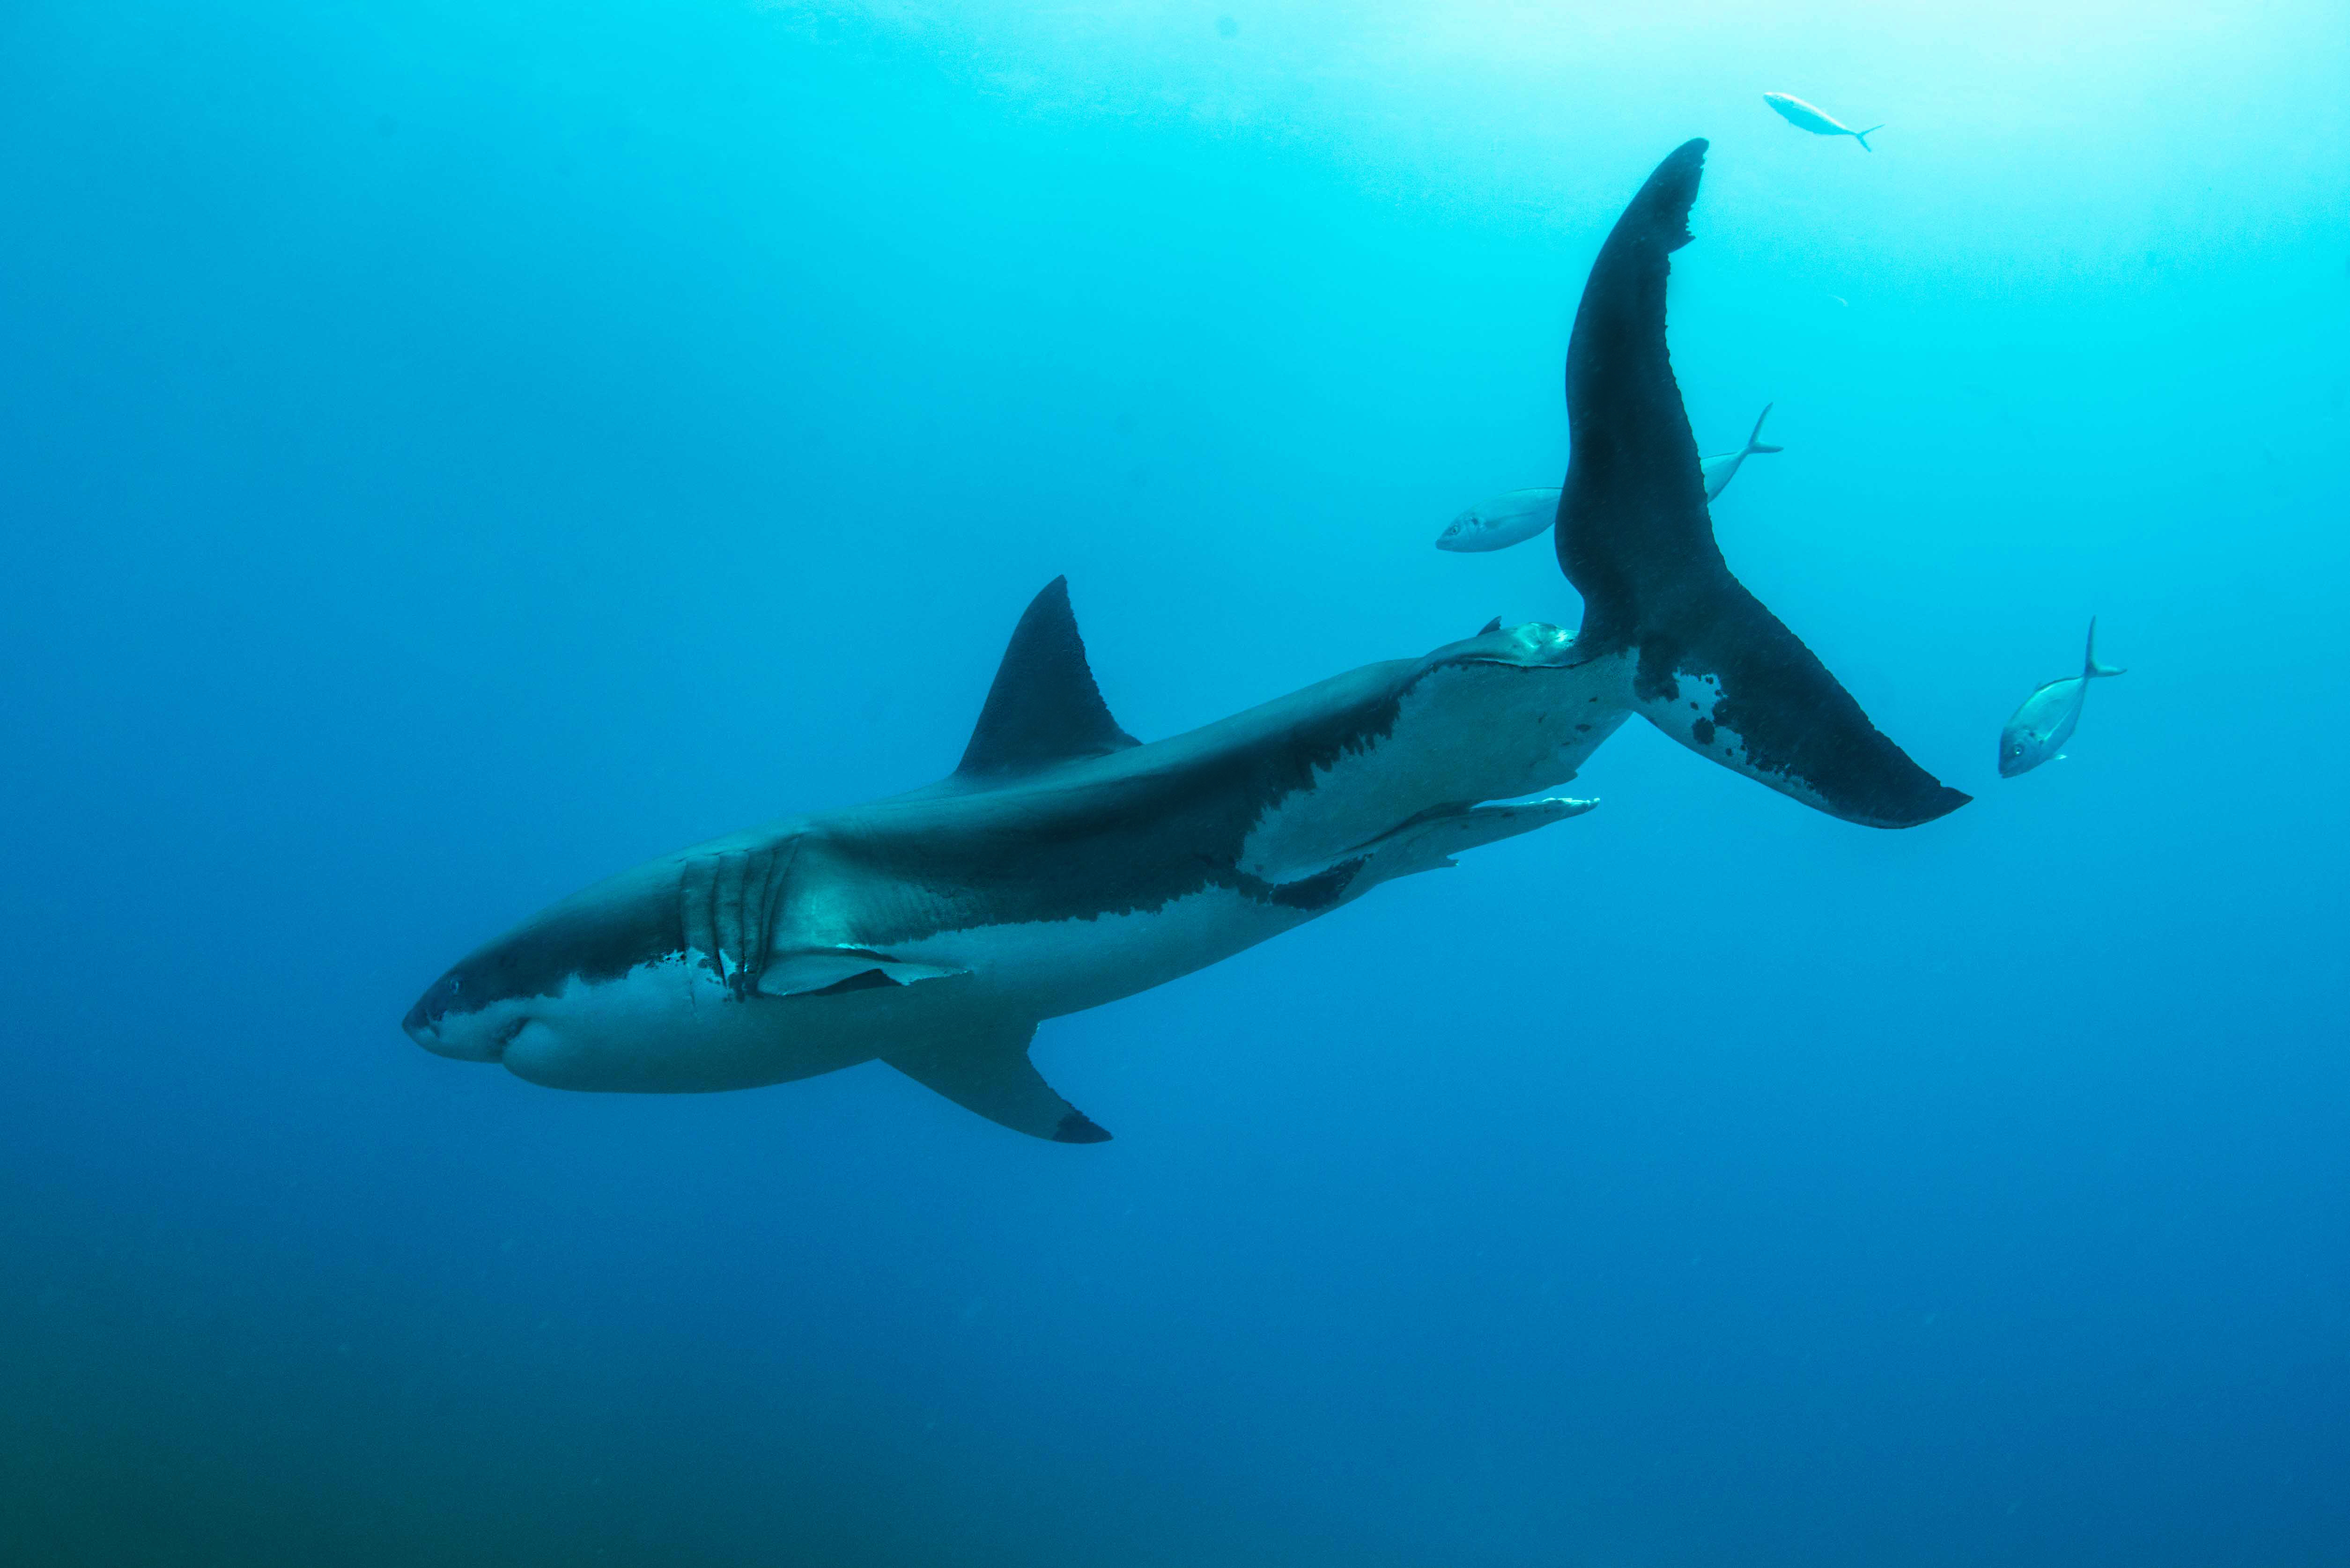 The great white shark individual known as Imax. Photo by Andrew Fox